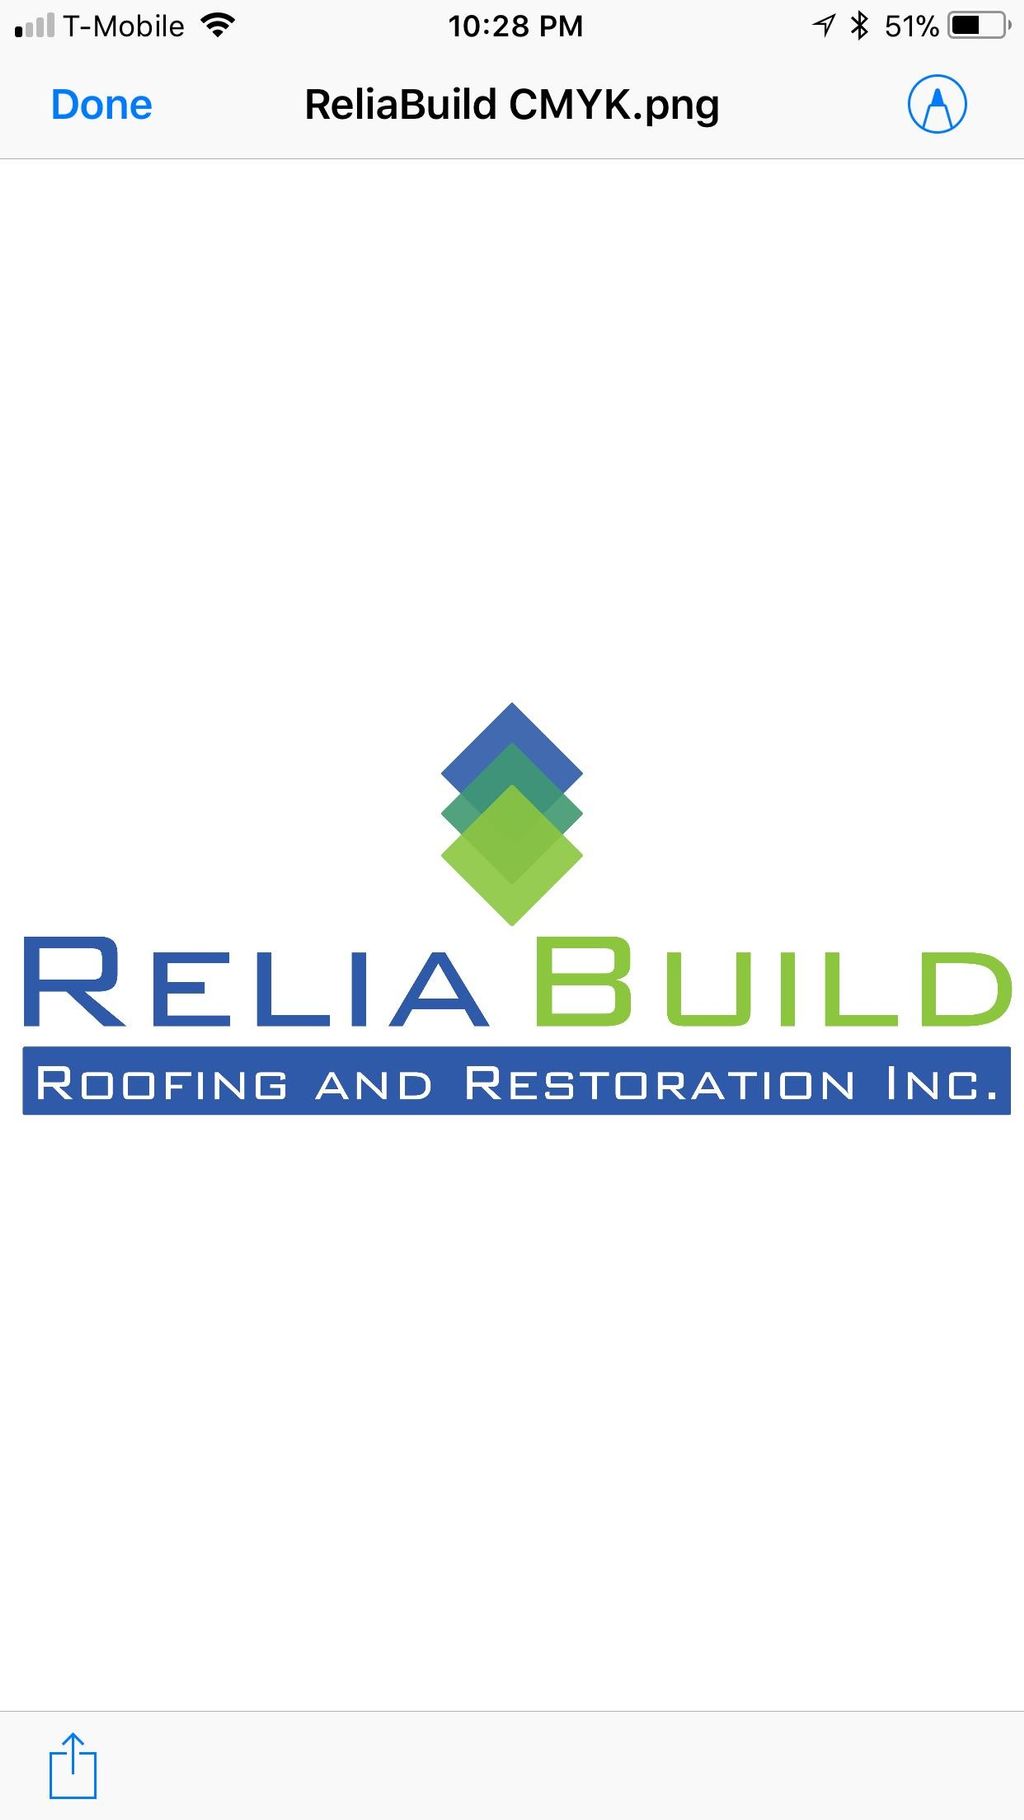 ReliaBuild Roofing and Restoration Inc.